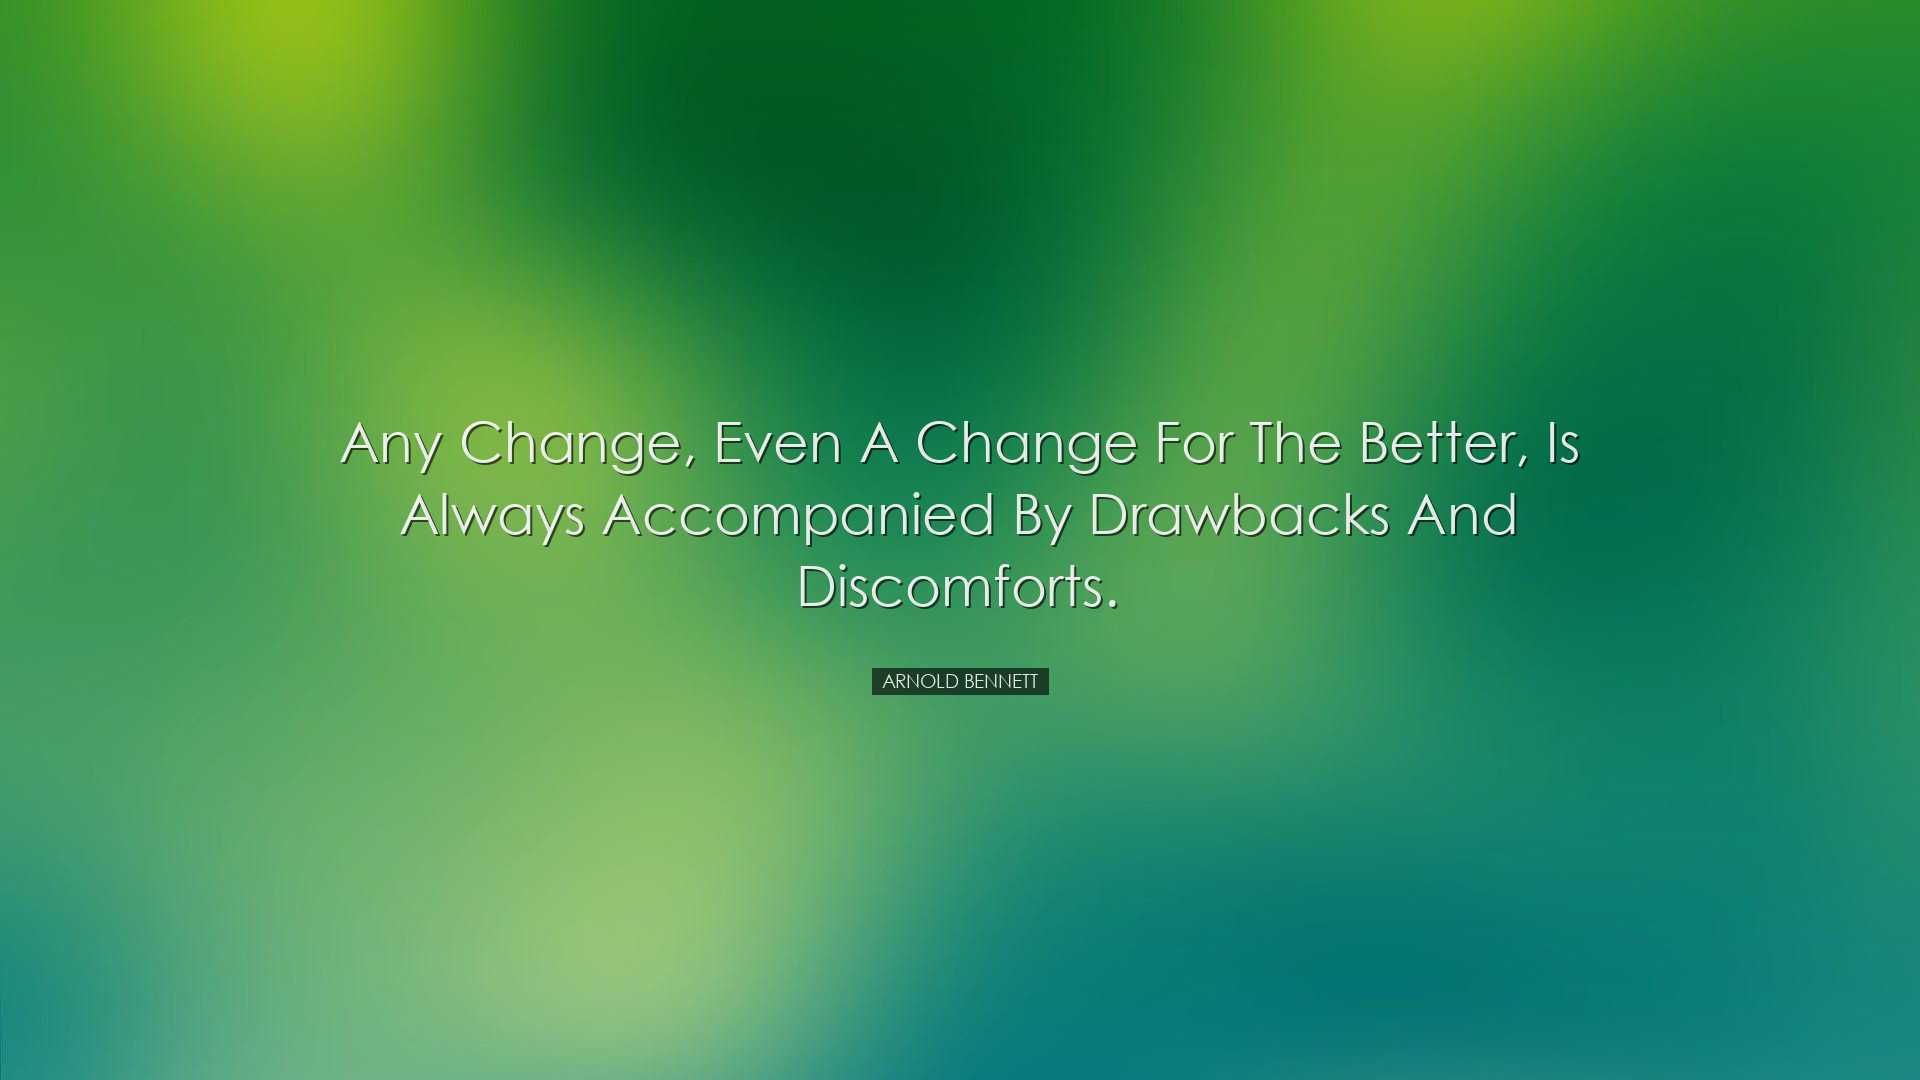 Any change, even a change for the better, is always accompanied by